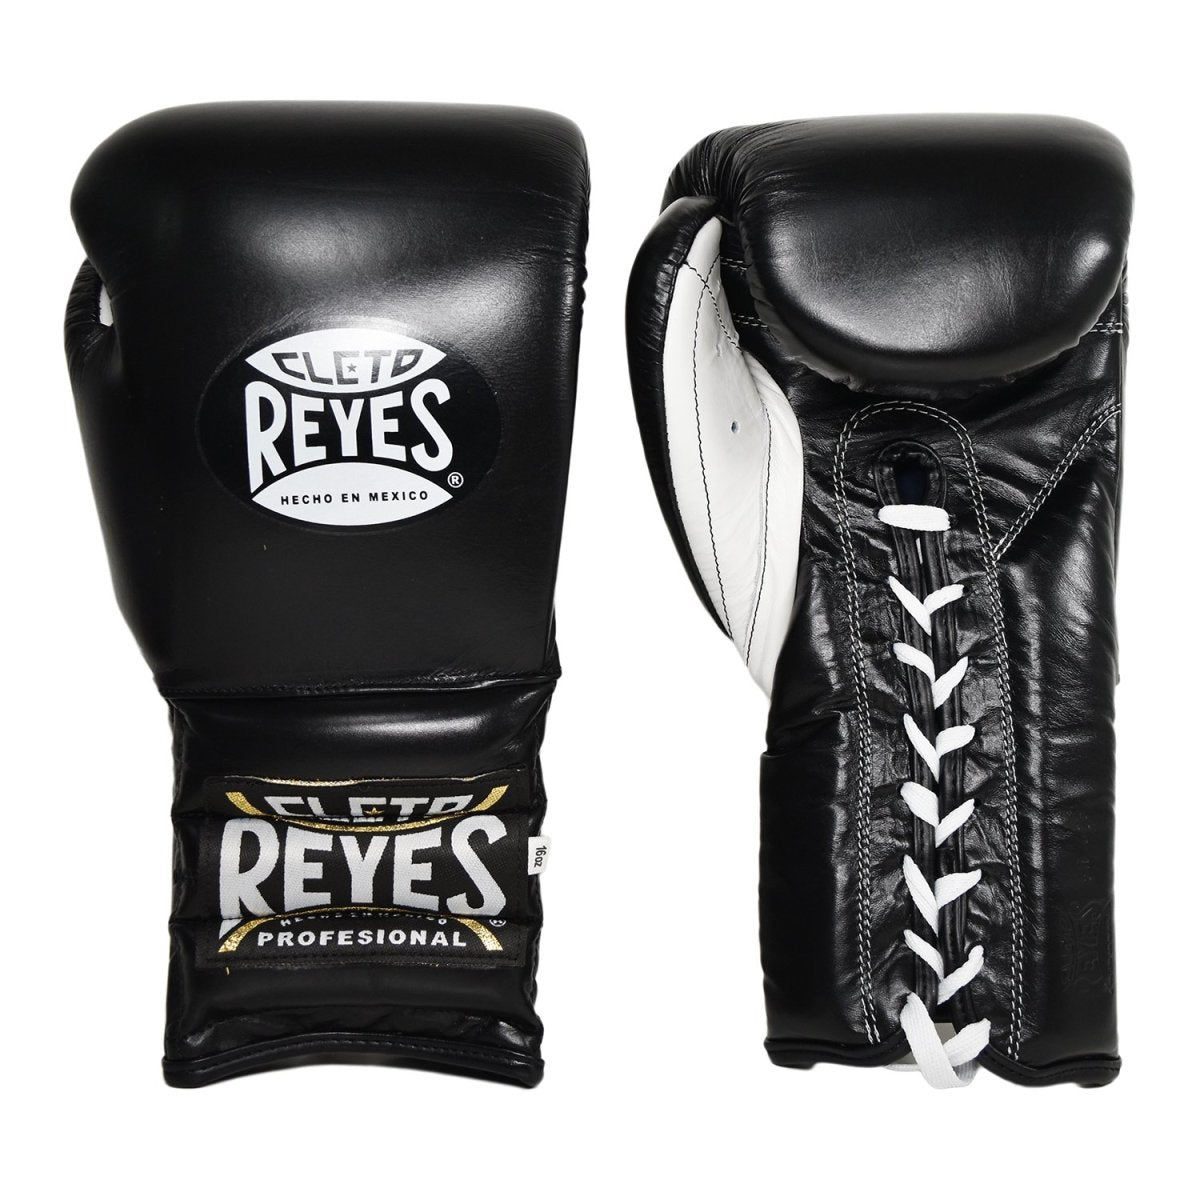  CLETO REYES Safetec Professional Competition Boxing Gloves for  Men and Women, MMA, Kickboxing, Muay Thai, Lace Up, 10 oz, Black : Sports &  Outdoors